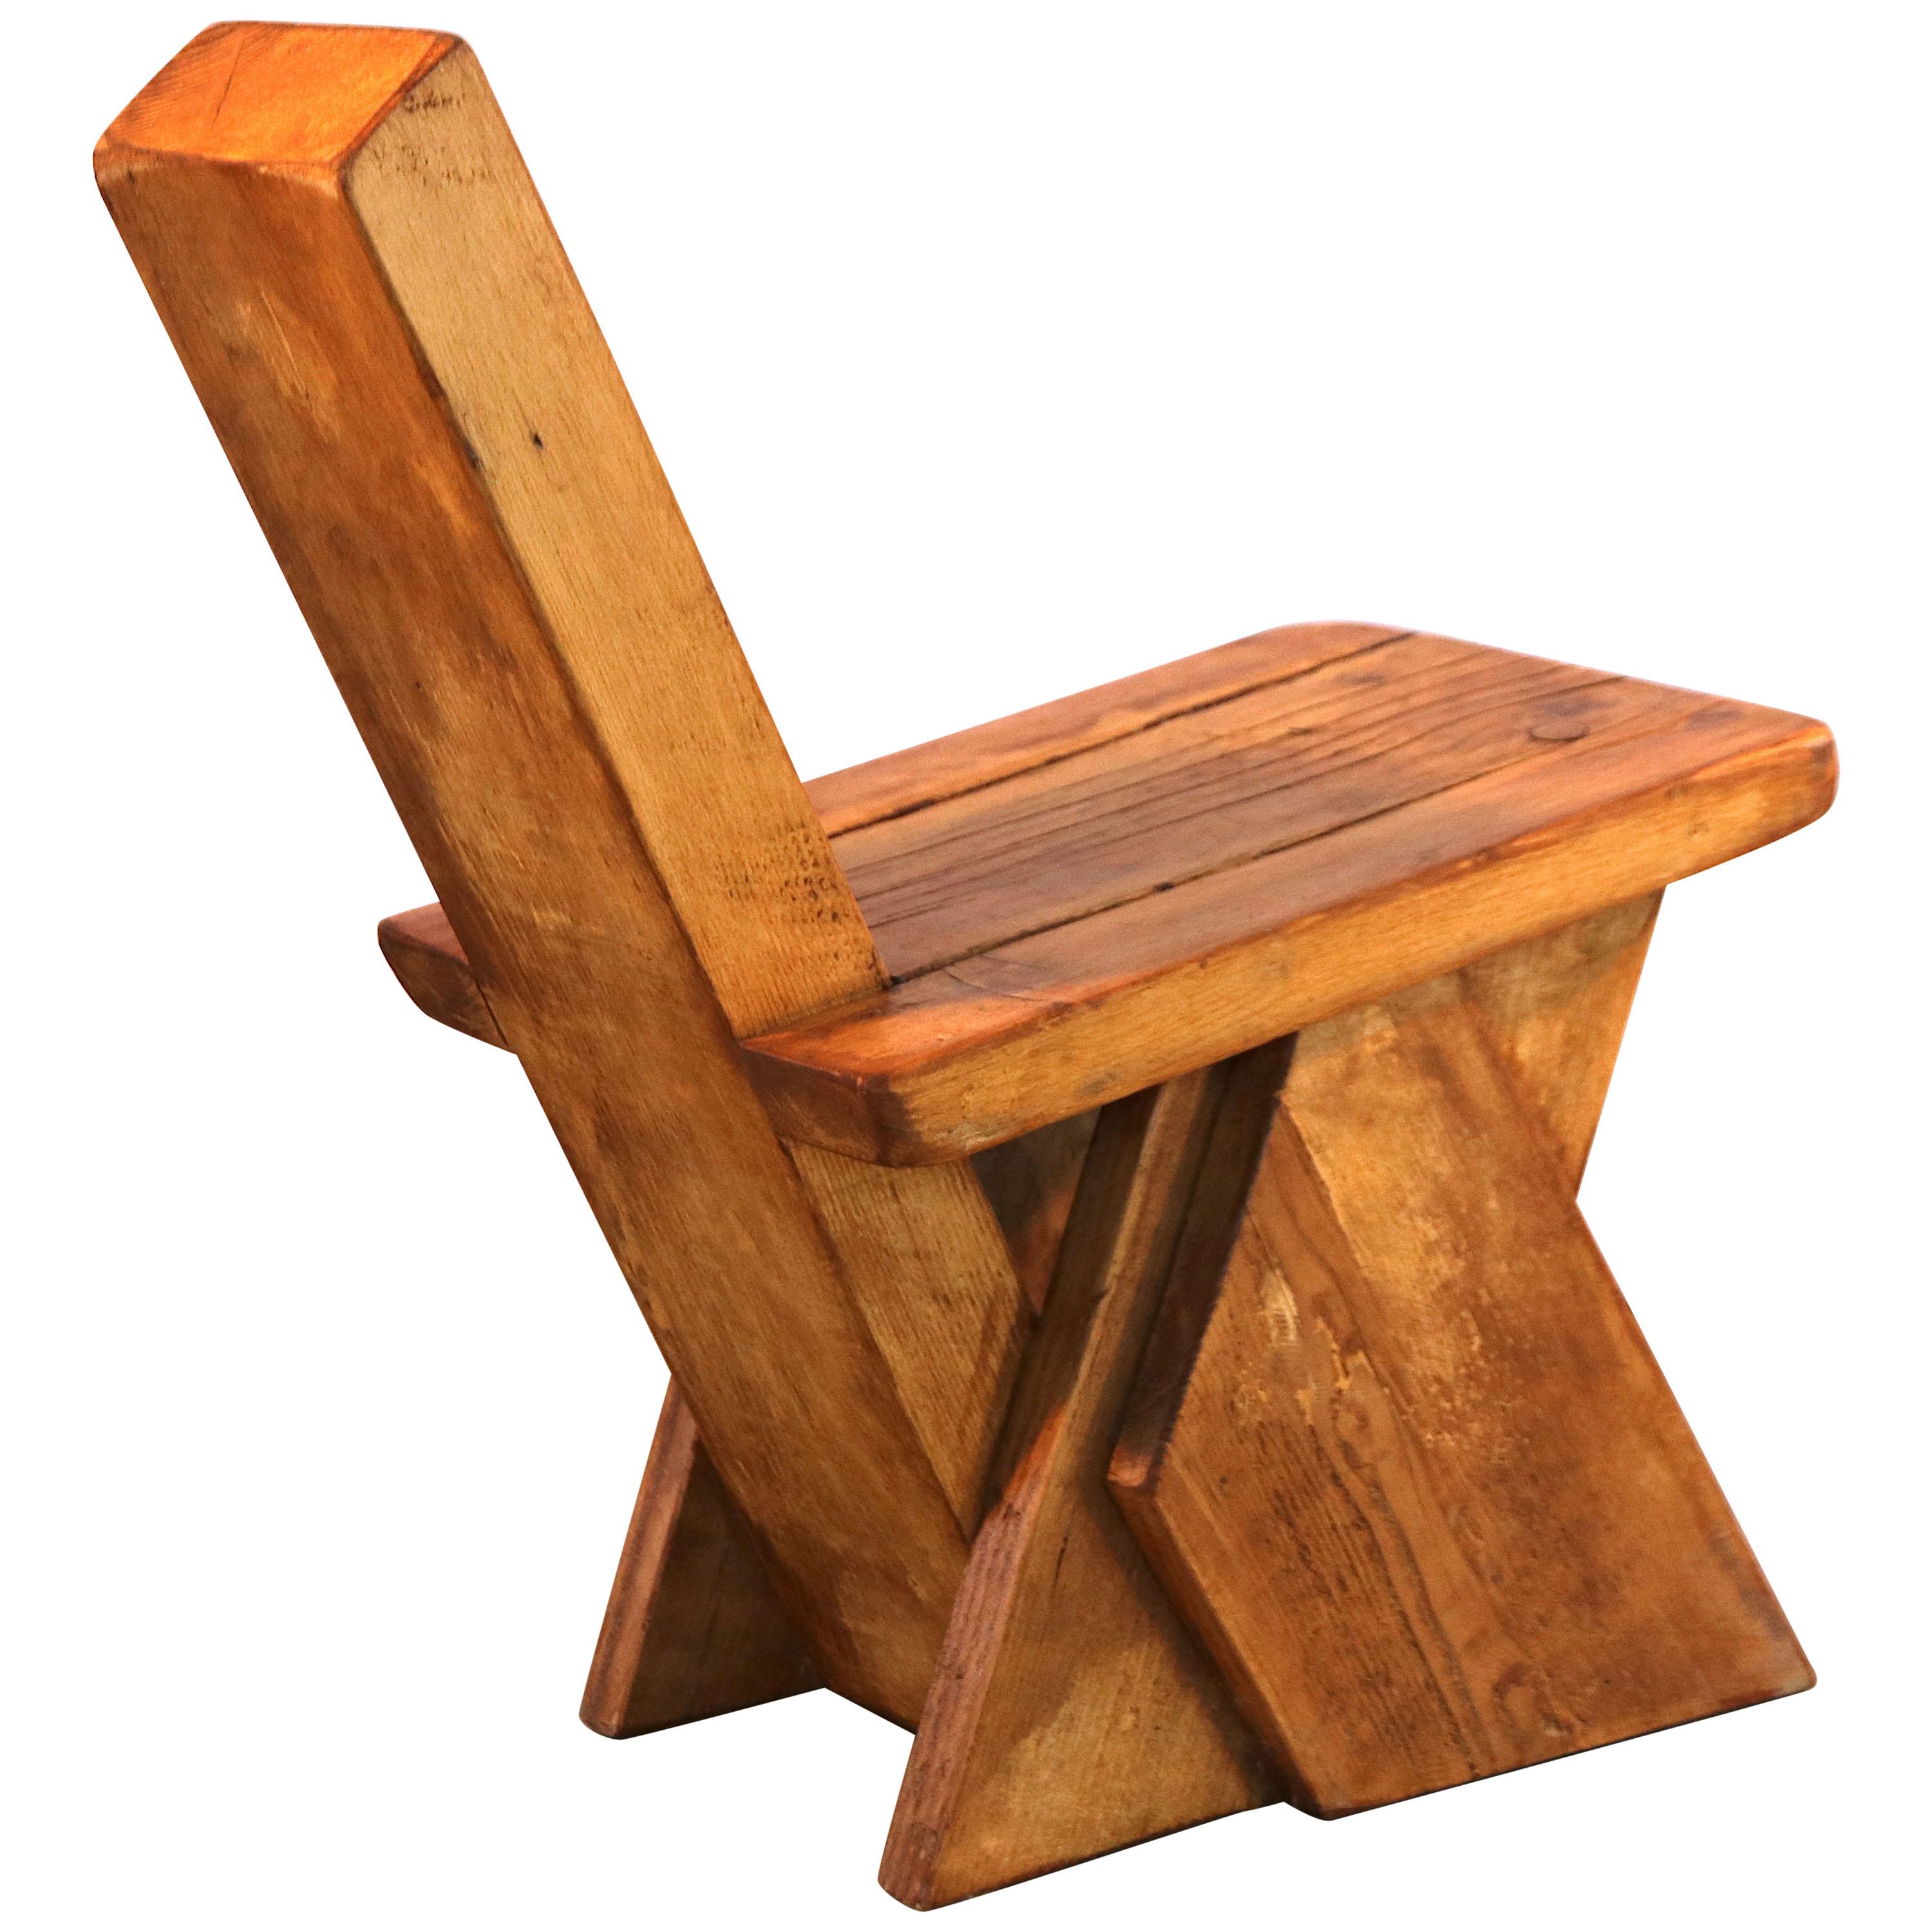 Brutalist Pierre Jeanneret Style Decorative Stool or Low Chair in French Oak